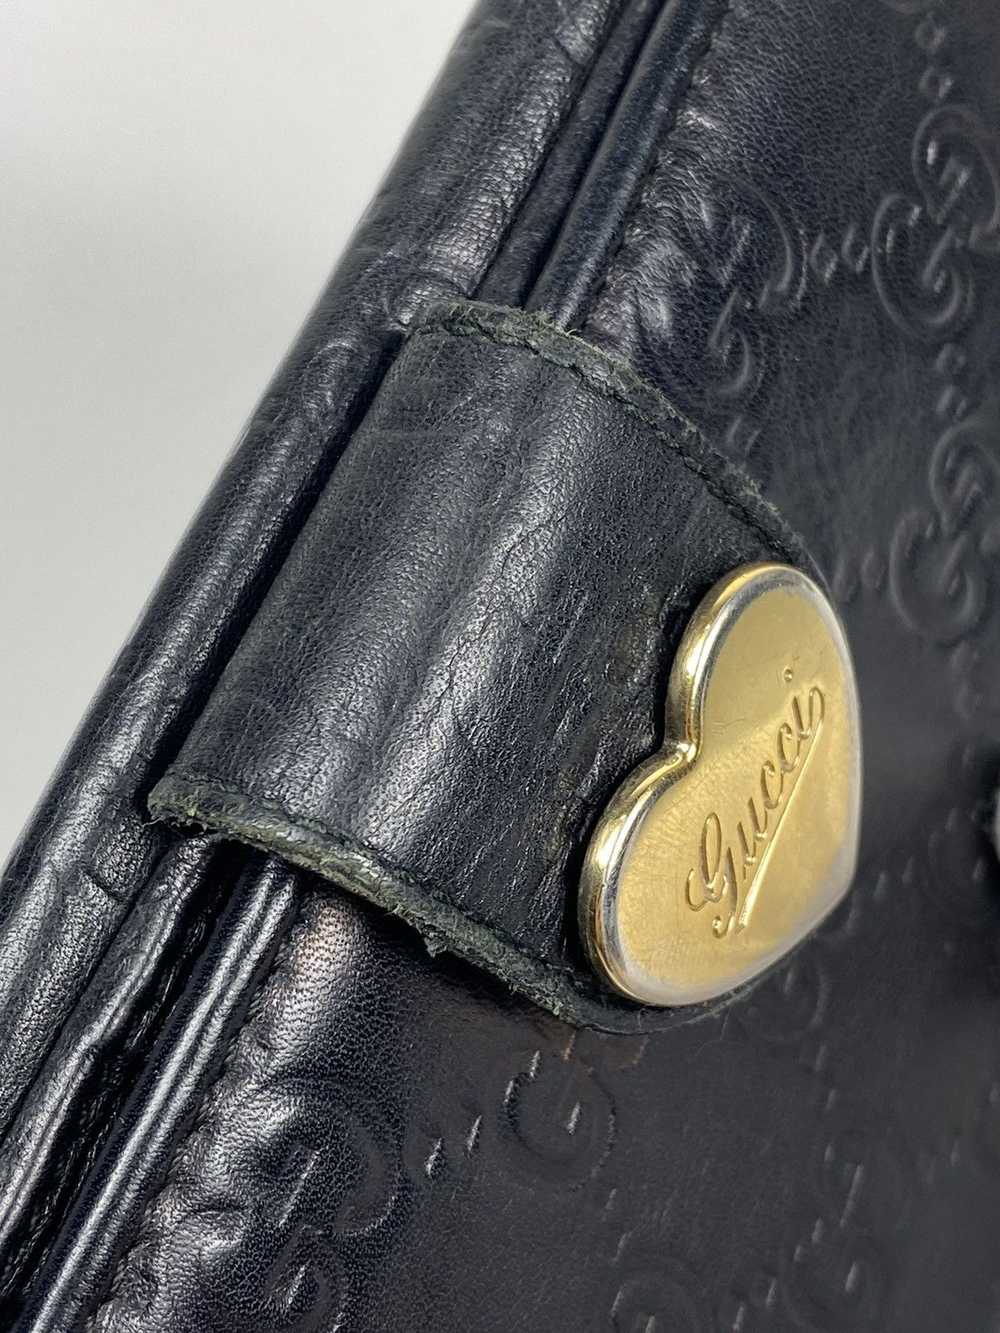 Gucci Gucci GG Guccissima leather long wallet - image 10